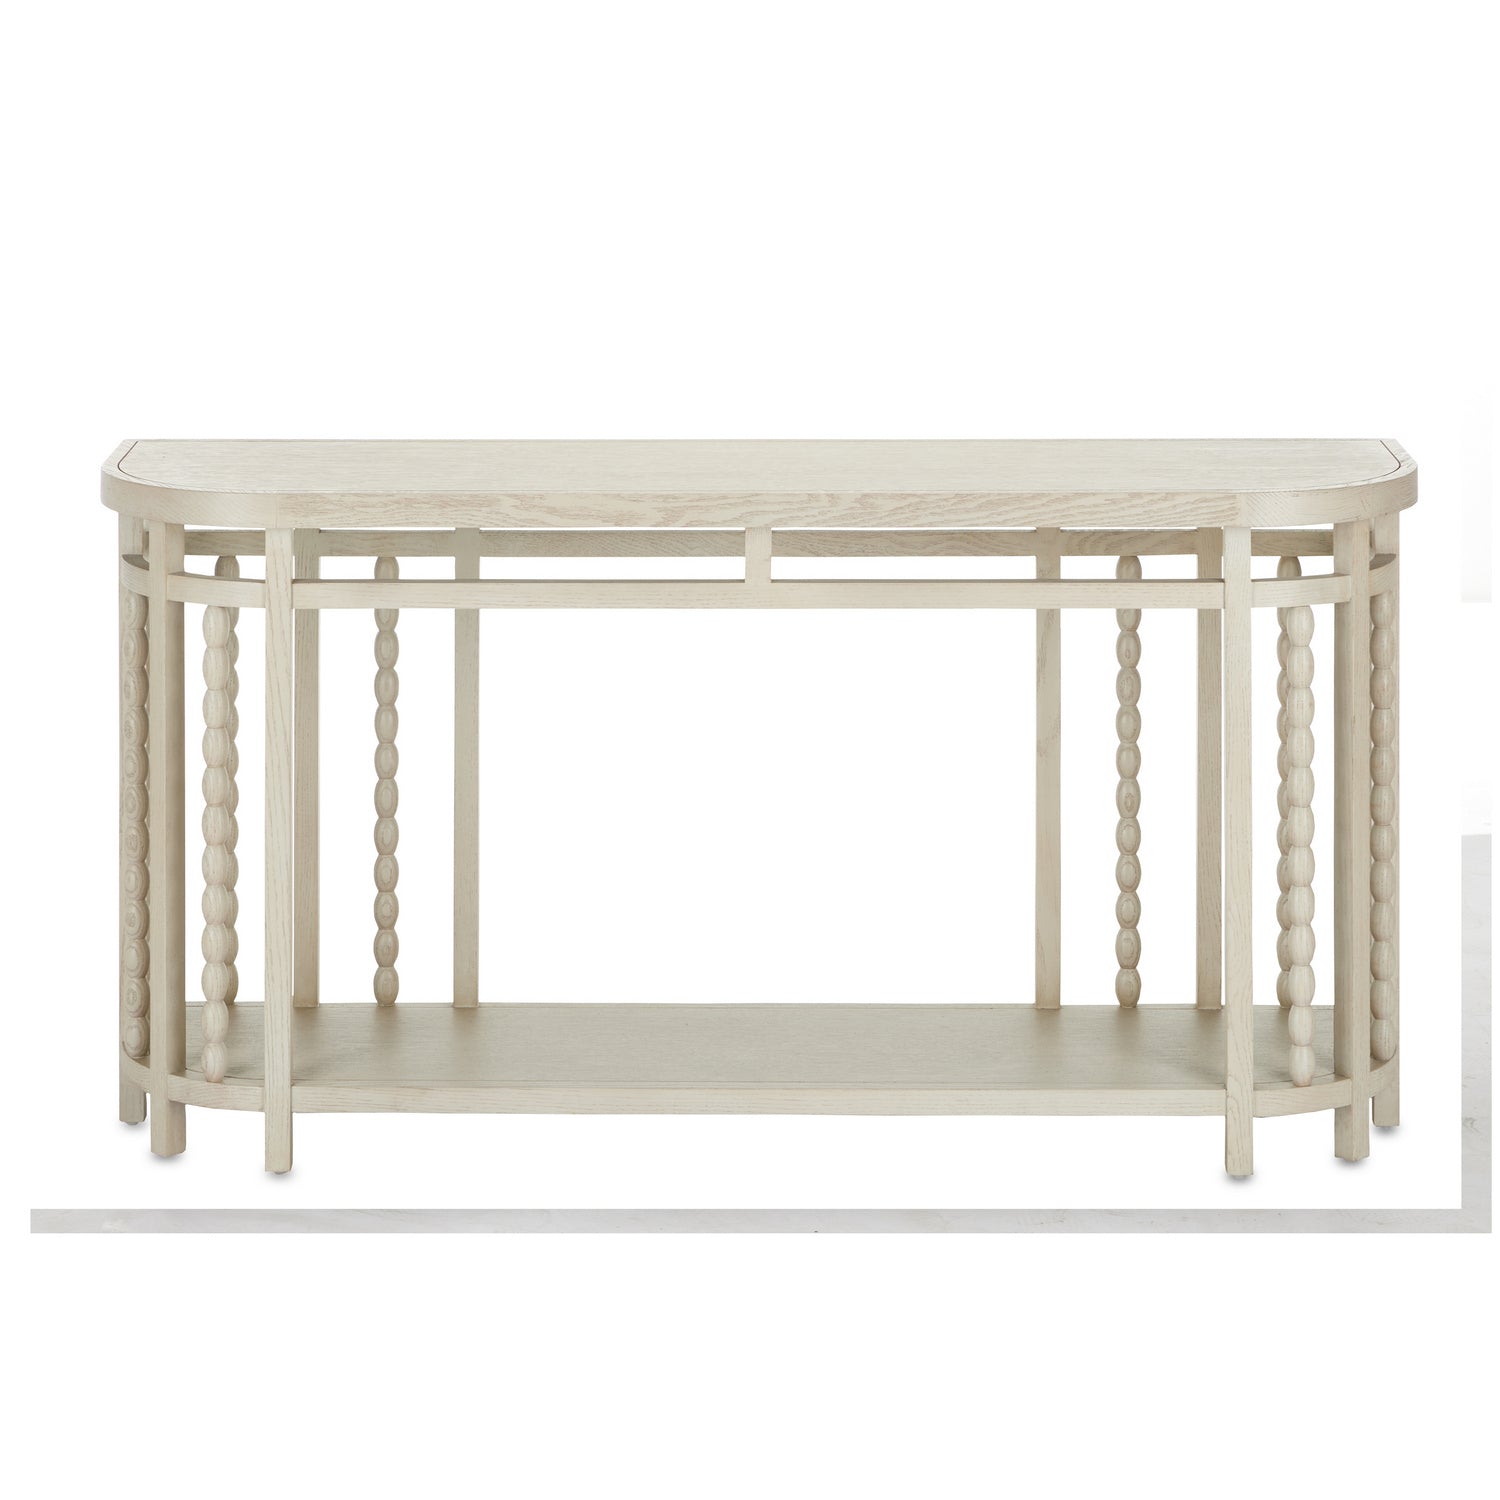 Console Table from the Norene collection in Fog Gray finish